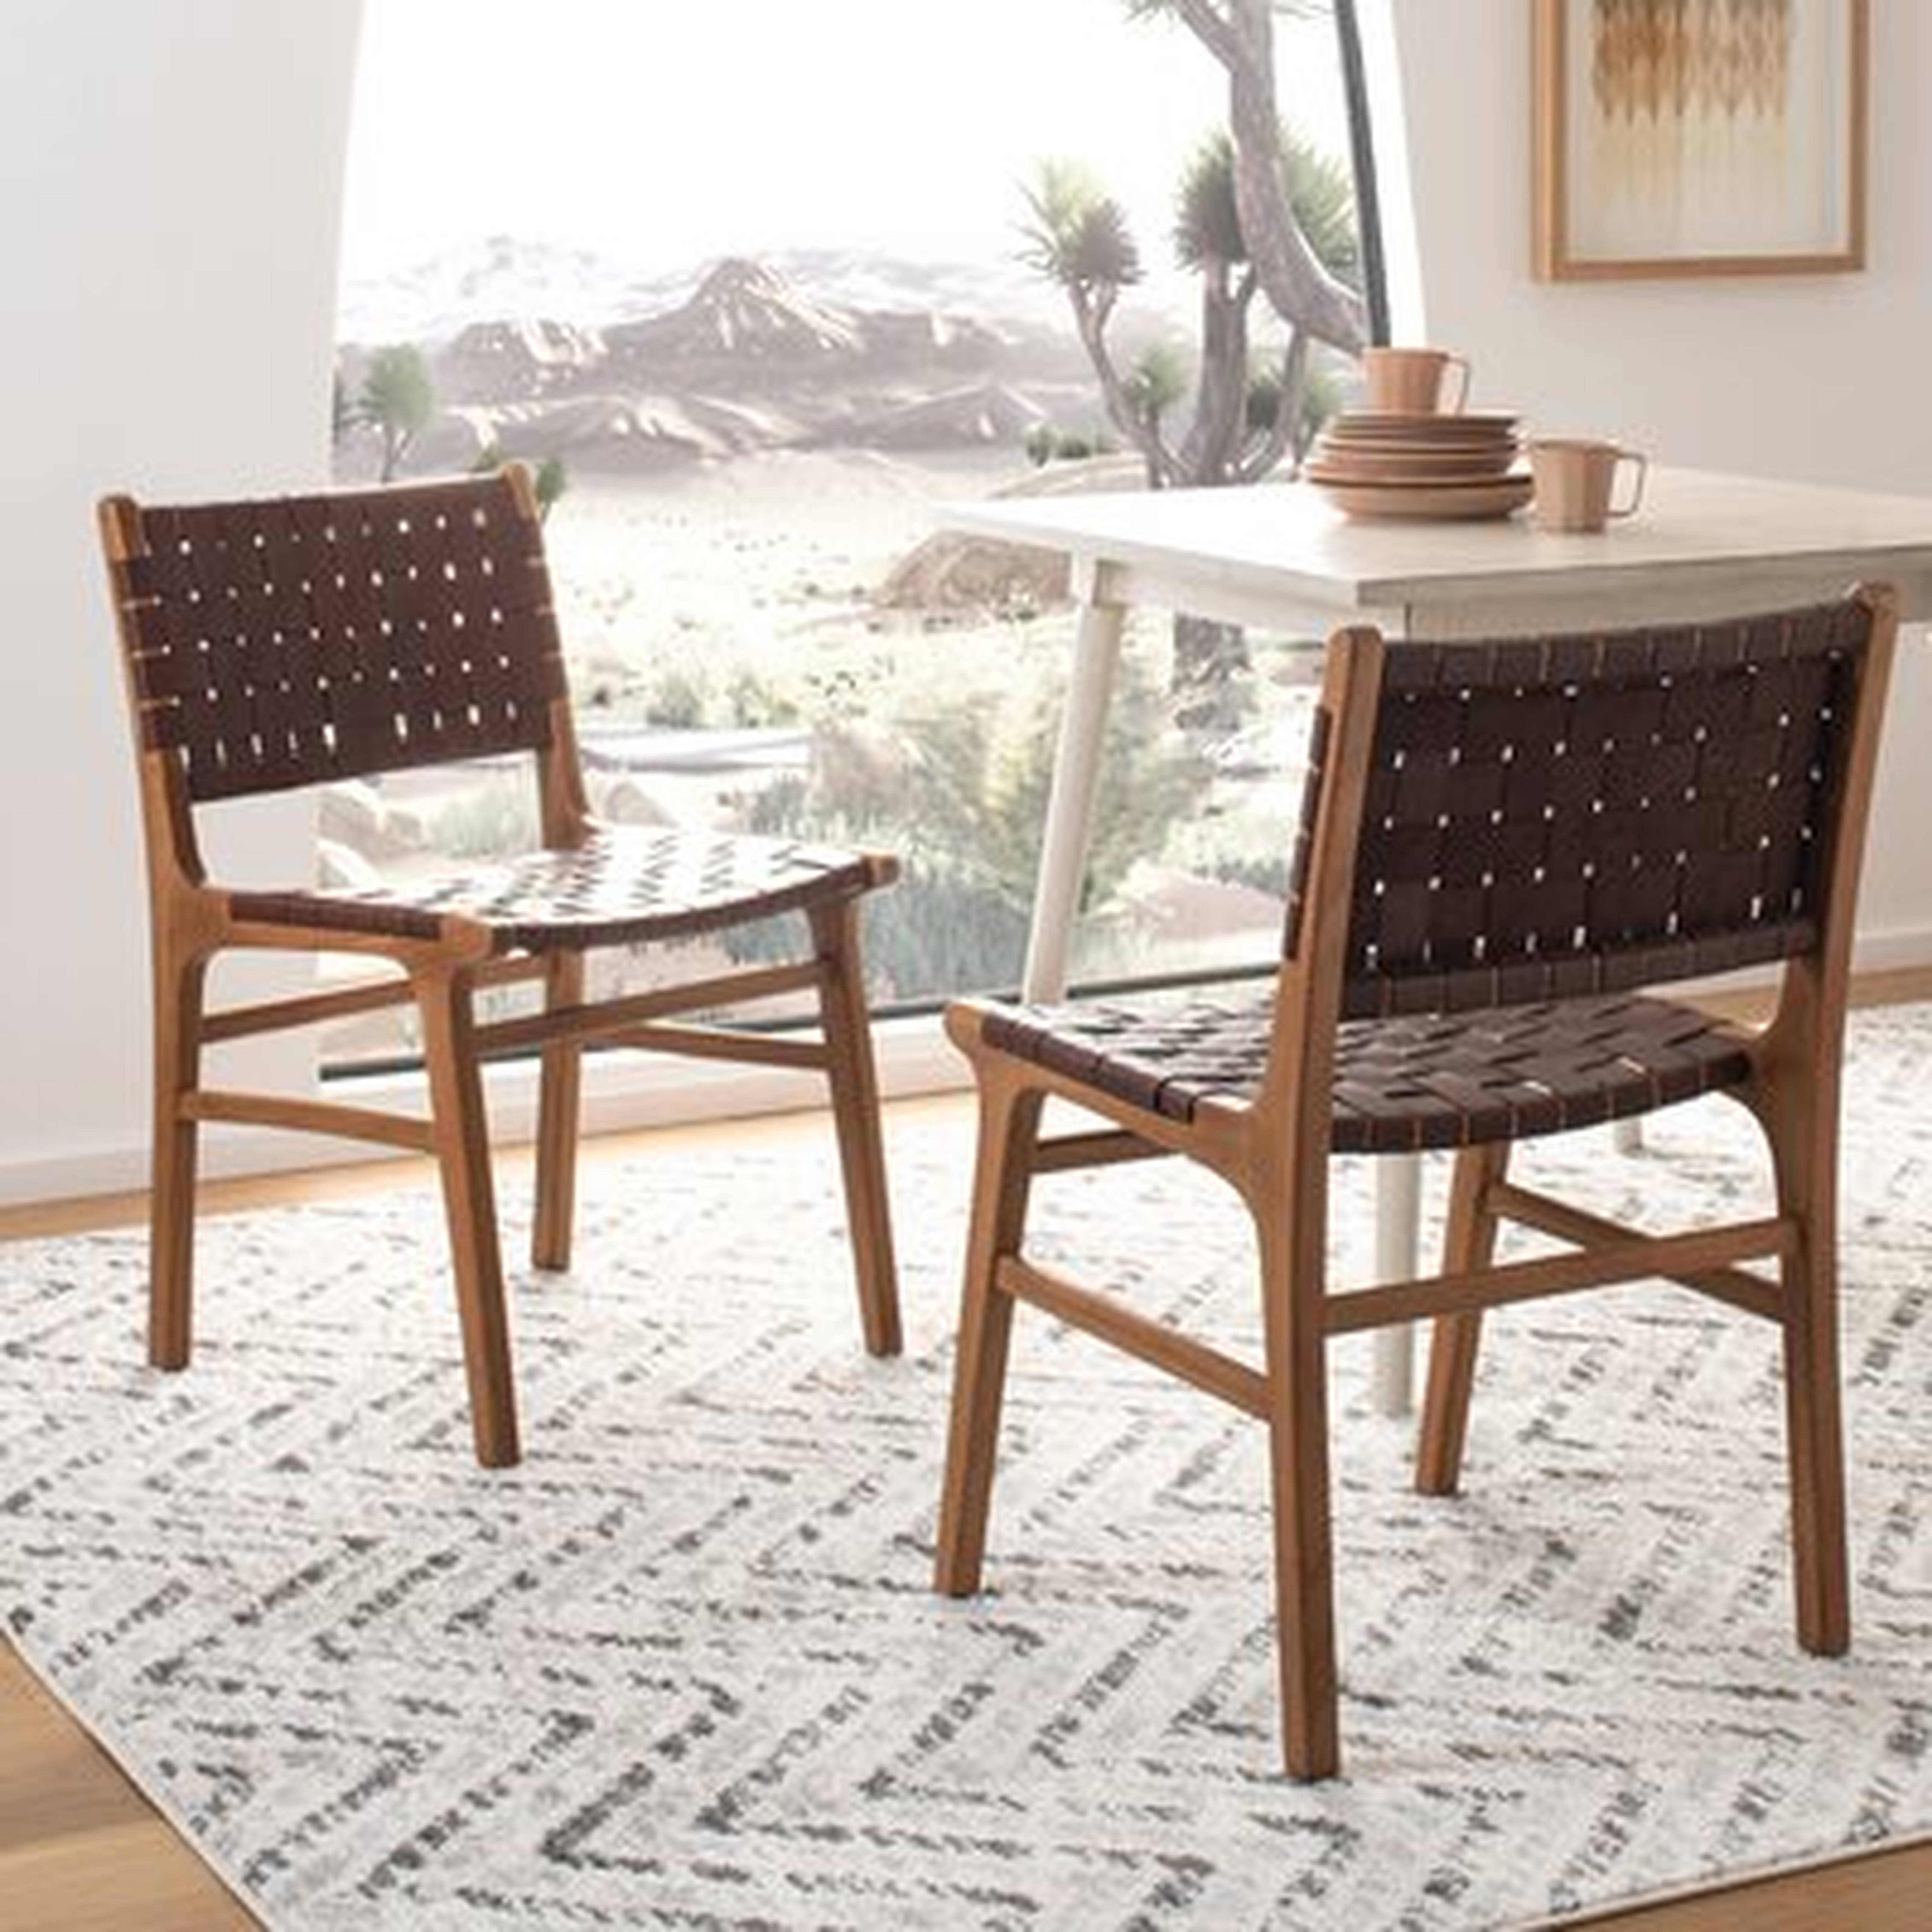 Alston Woven Leather & Solid Wood Dining Chair - AllModern